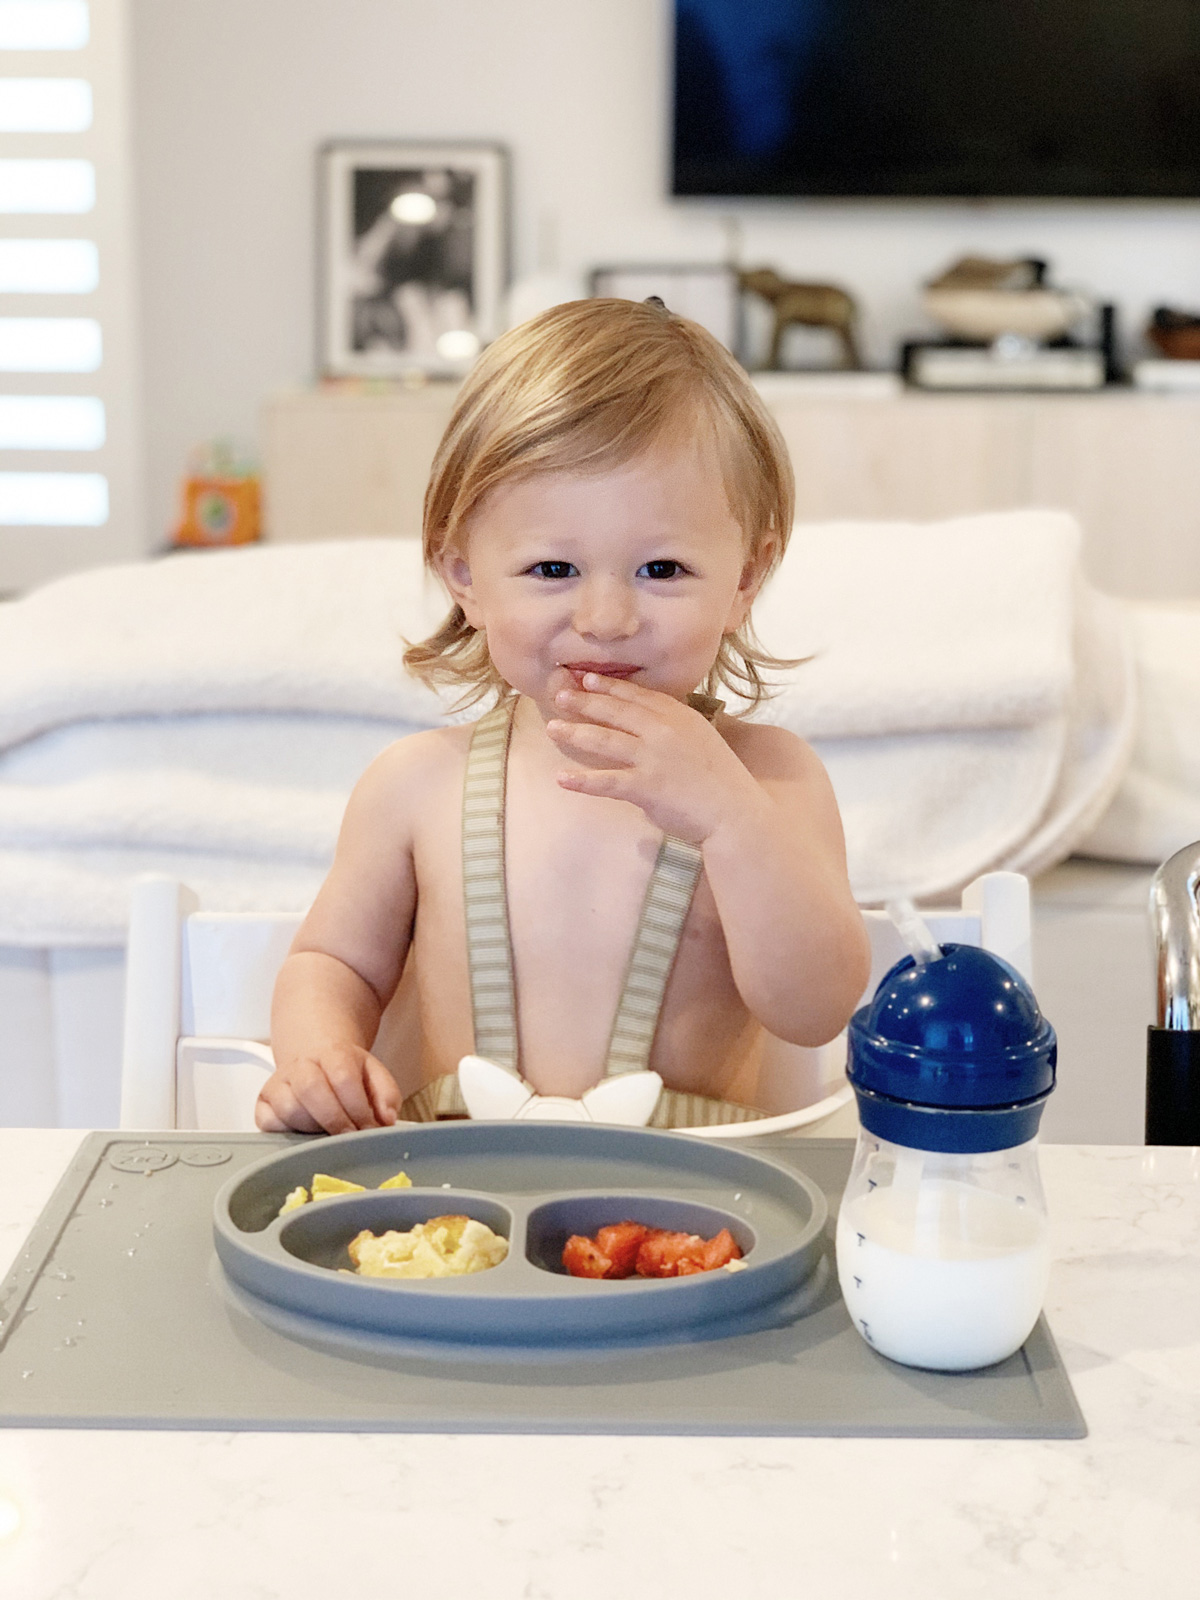 Toddler Feeding Essentials: 18 months featuring stokke tripp trapp highchair, ezpz mat, and oxo tot straw cup for eatsleepwear kimberly lapides